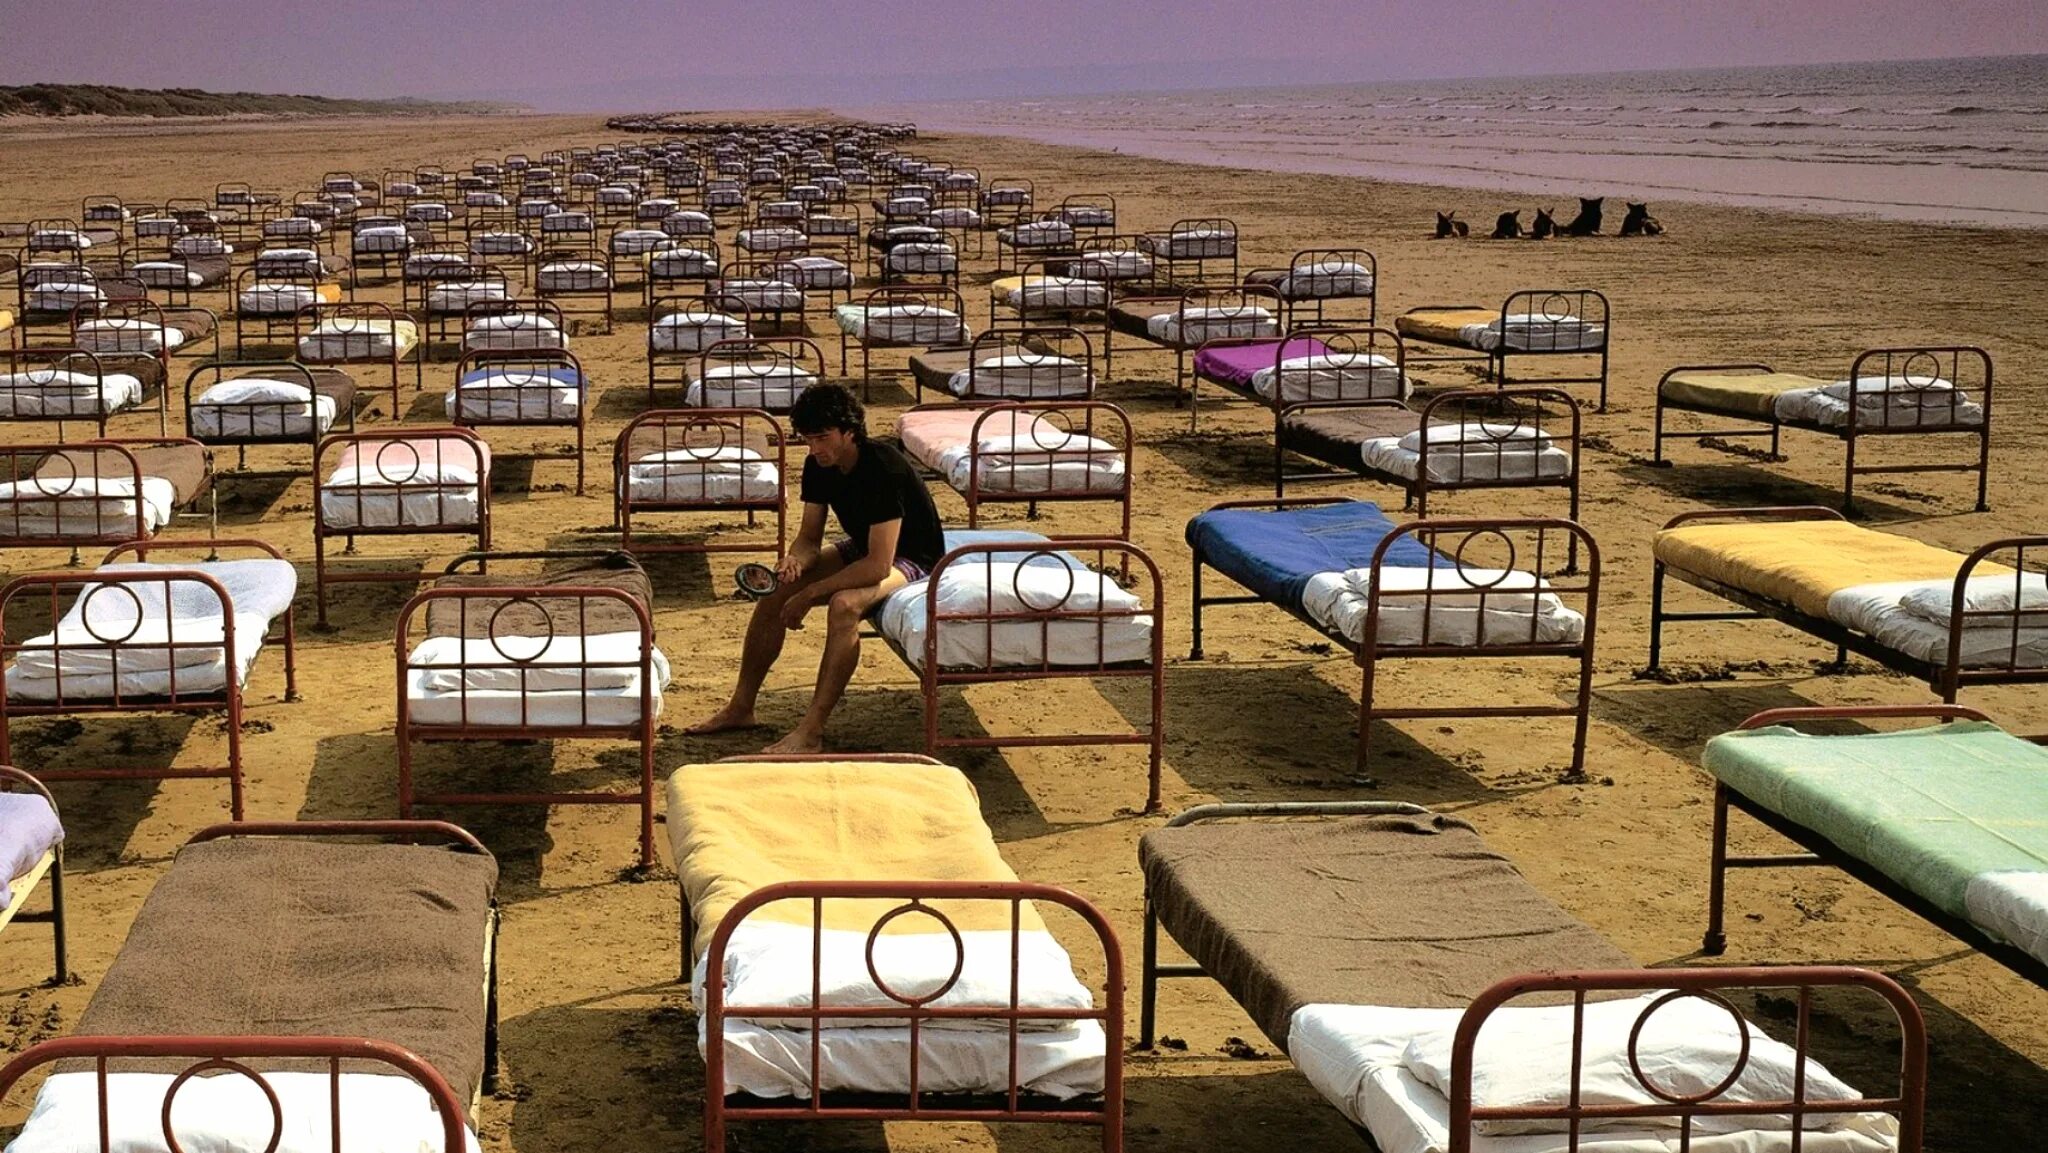 Momentary lapse of reasoning. Pink Floyd a Momentary lapse of reason. 1987 - A Momentary lapse of reason. Сторм Торгерсон a Momentary lapse of reason. Pink Floyd a Momentary lapse of reason (1987 год).